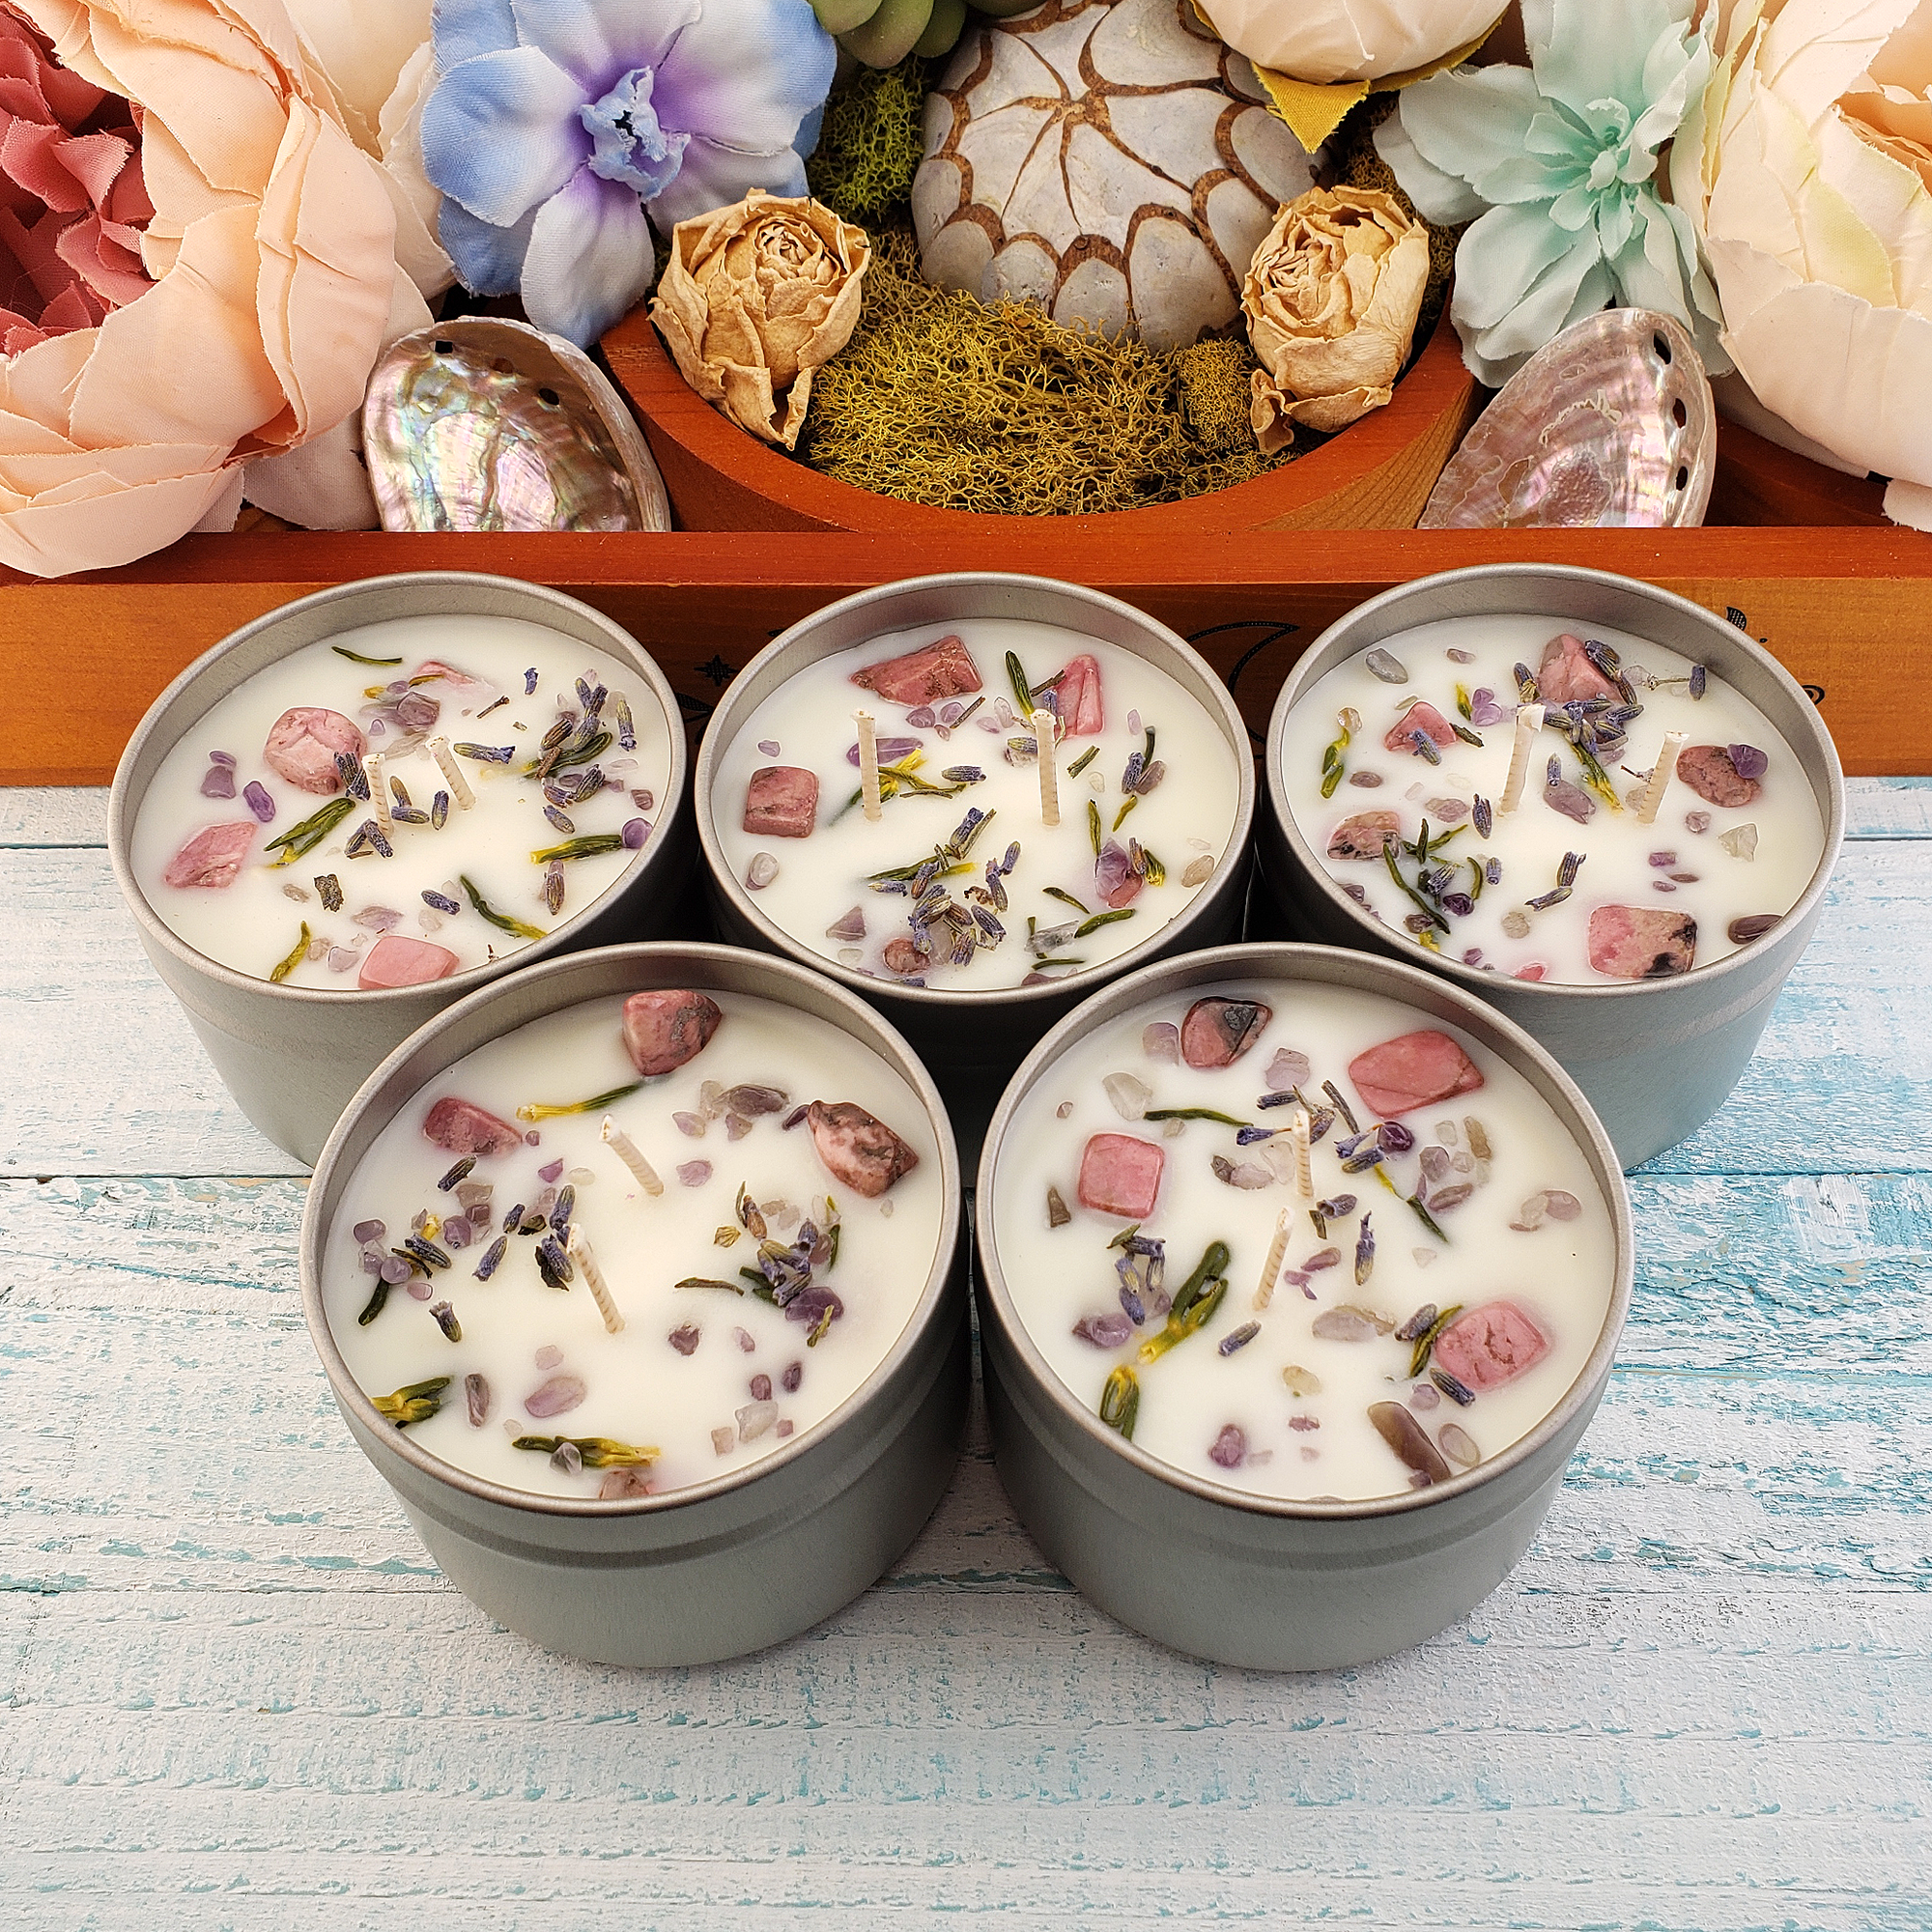 Magic Garden | LIMITED 4oz Handmade Coconut Soy Wax Scented Candle in Metal Tin with Lid - Group Photo